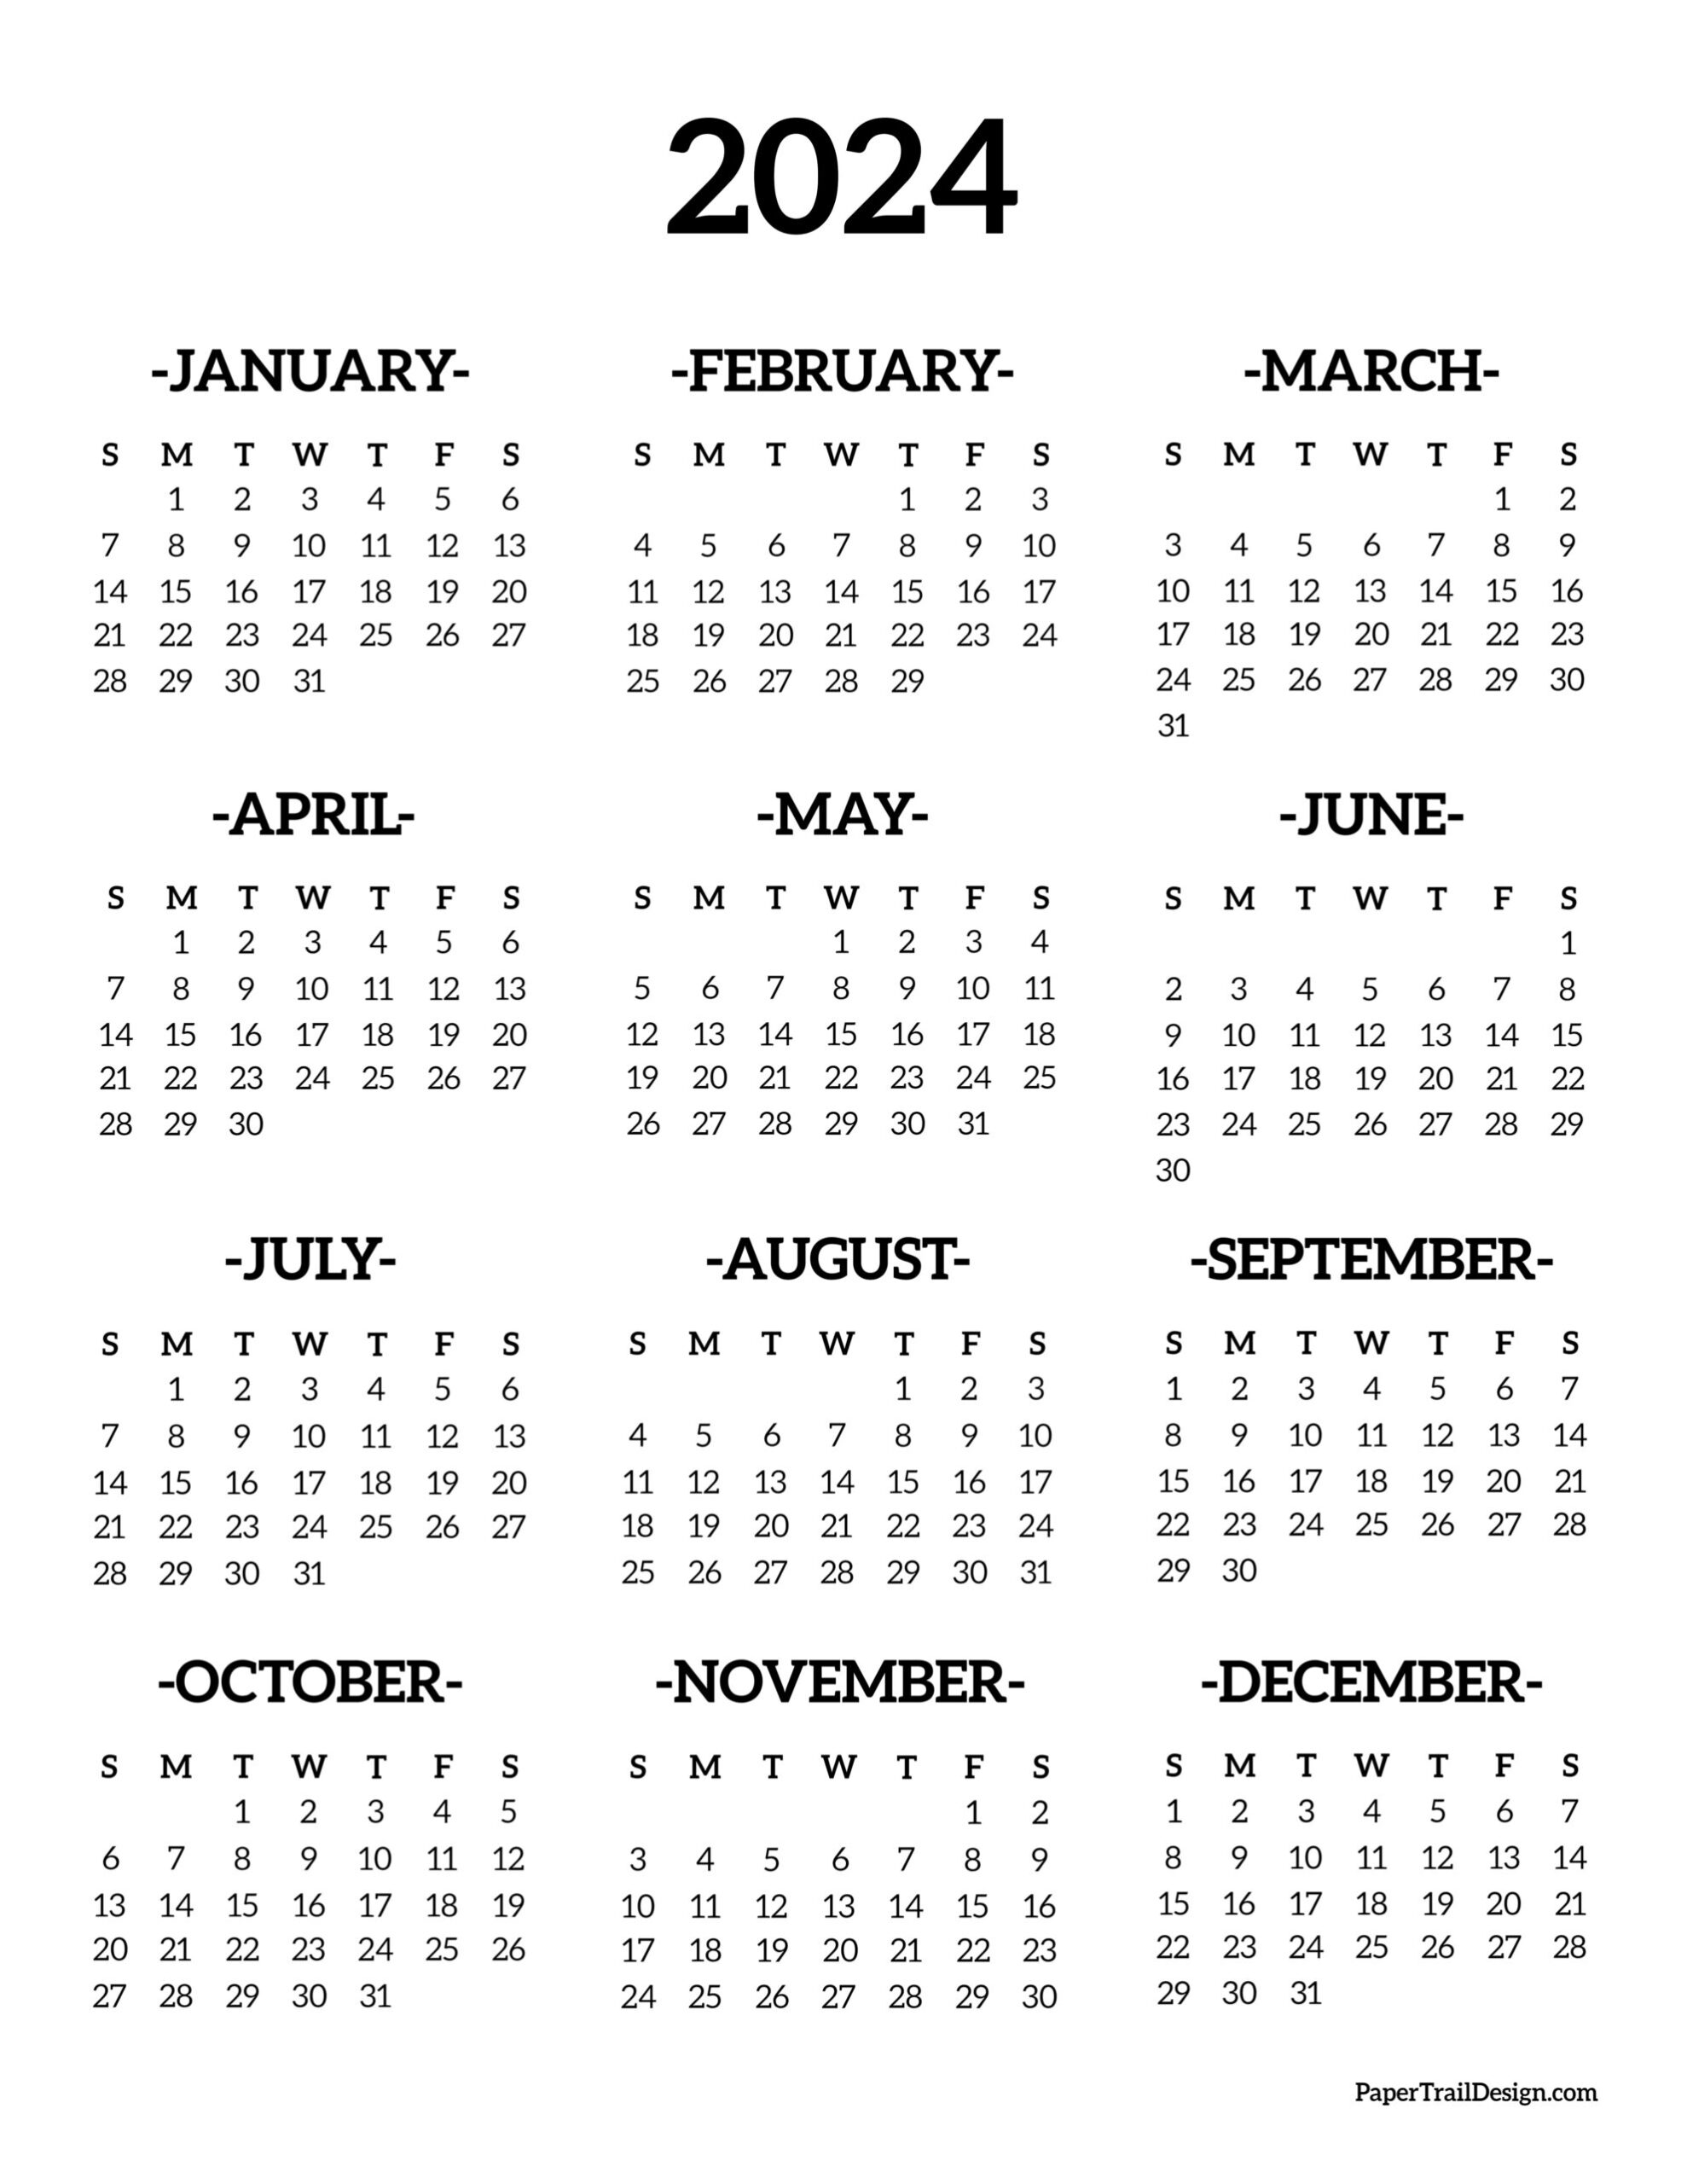 Calendar 2024 Printable One Page - Paper Trail Design for Yearly 2024 Printable Calendar